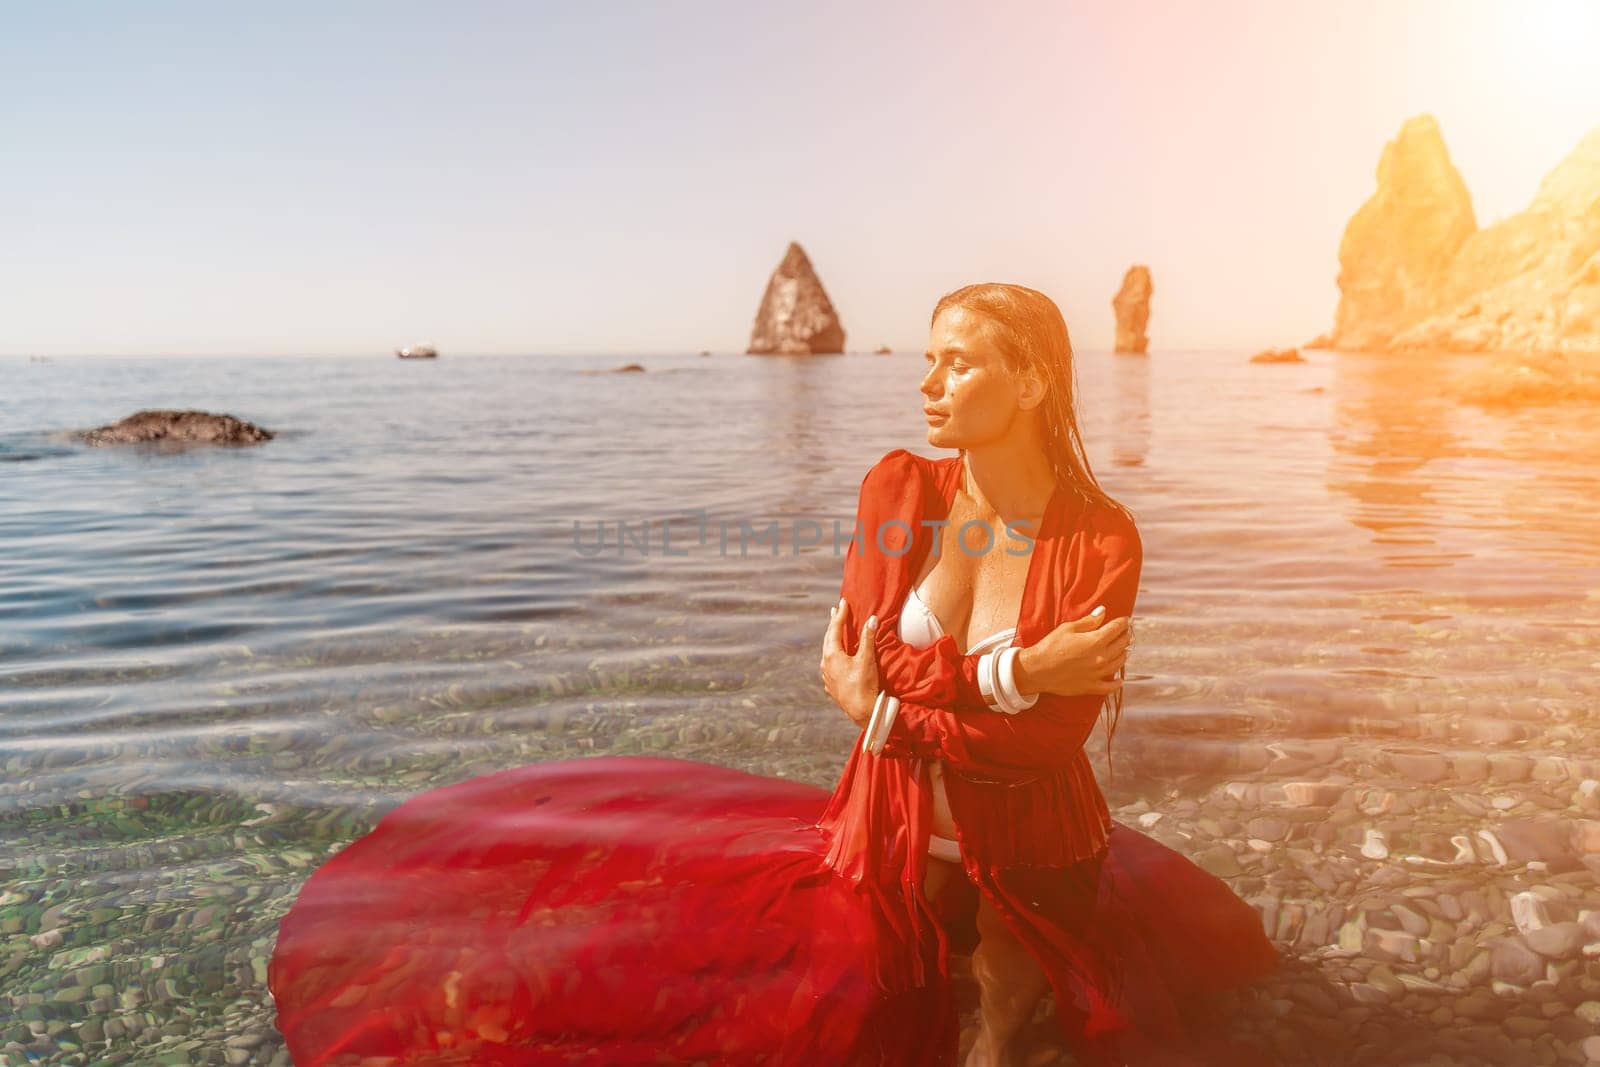 woman sea red dress. Beautiful sensual woman in a flying red dress and long hair, standing in sea in a large bay